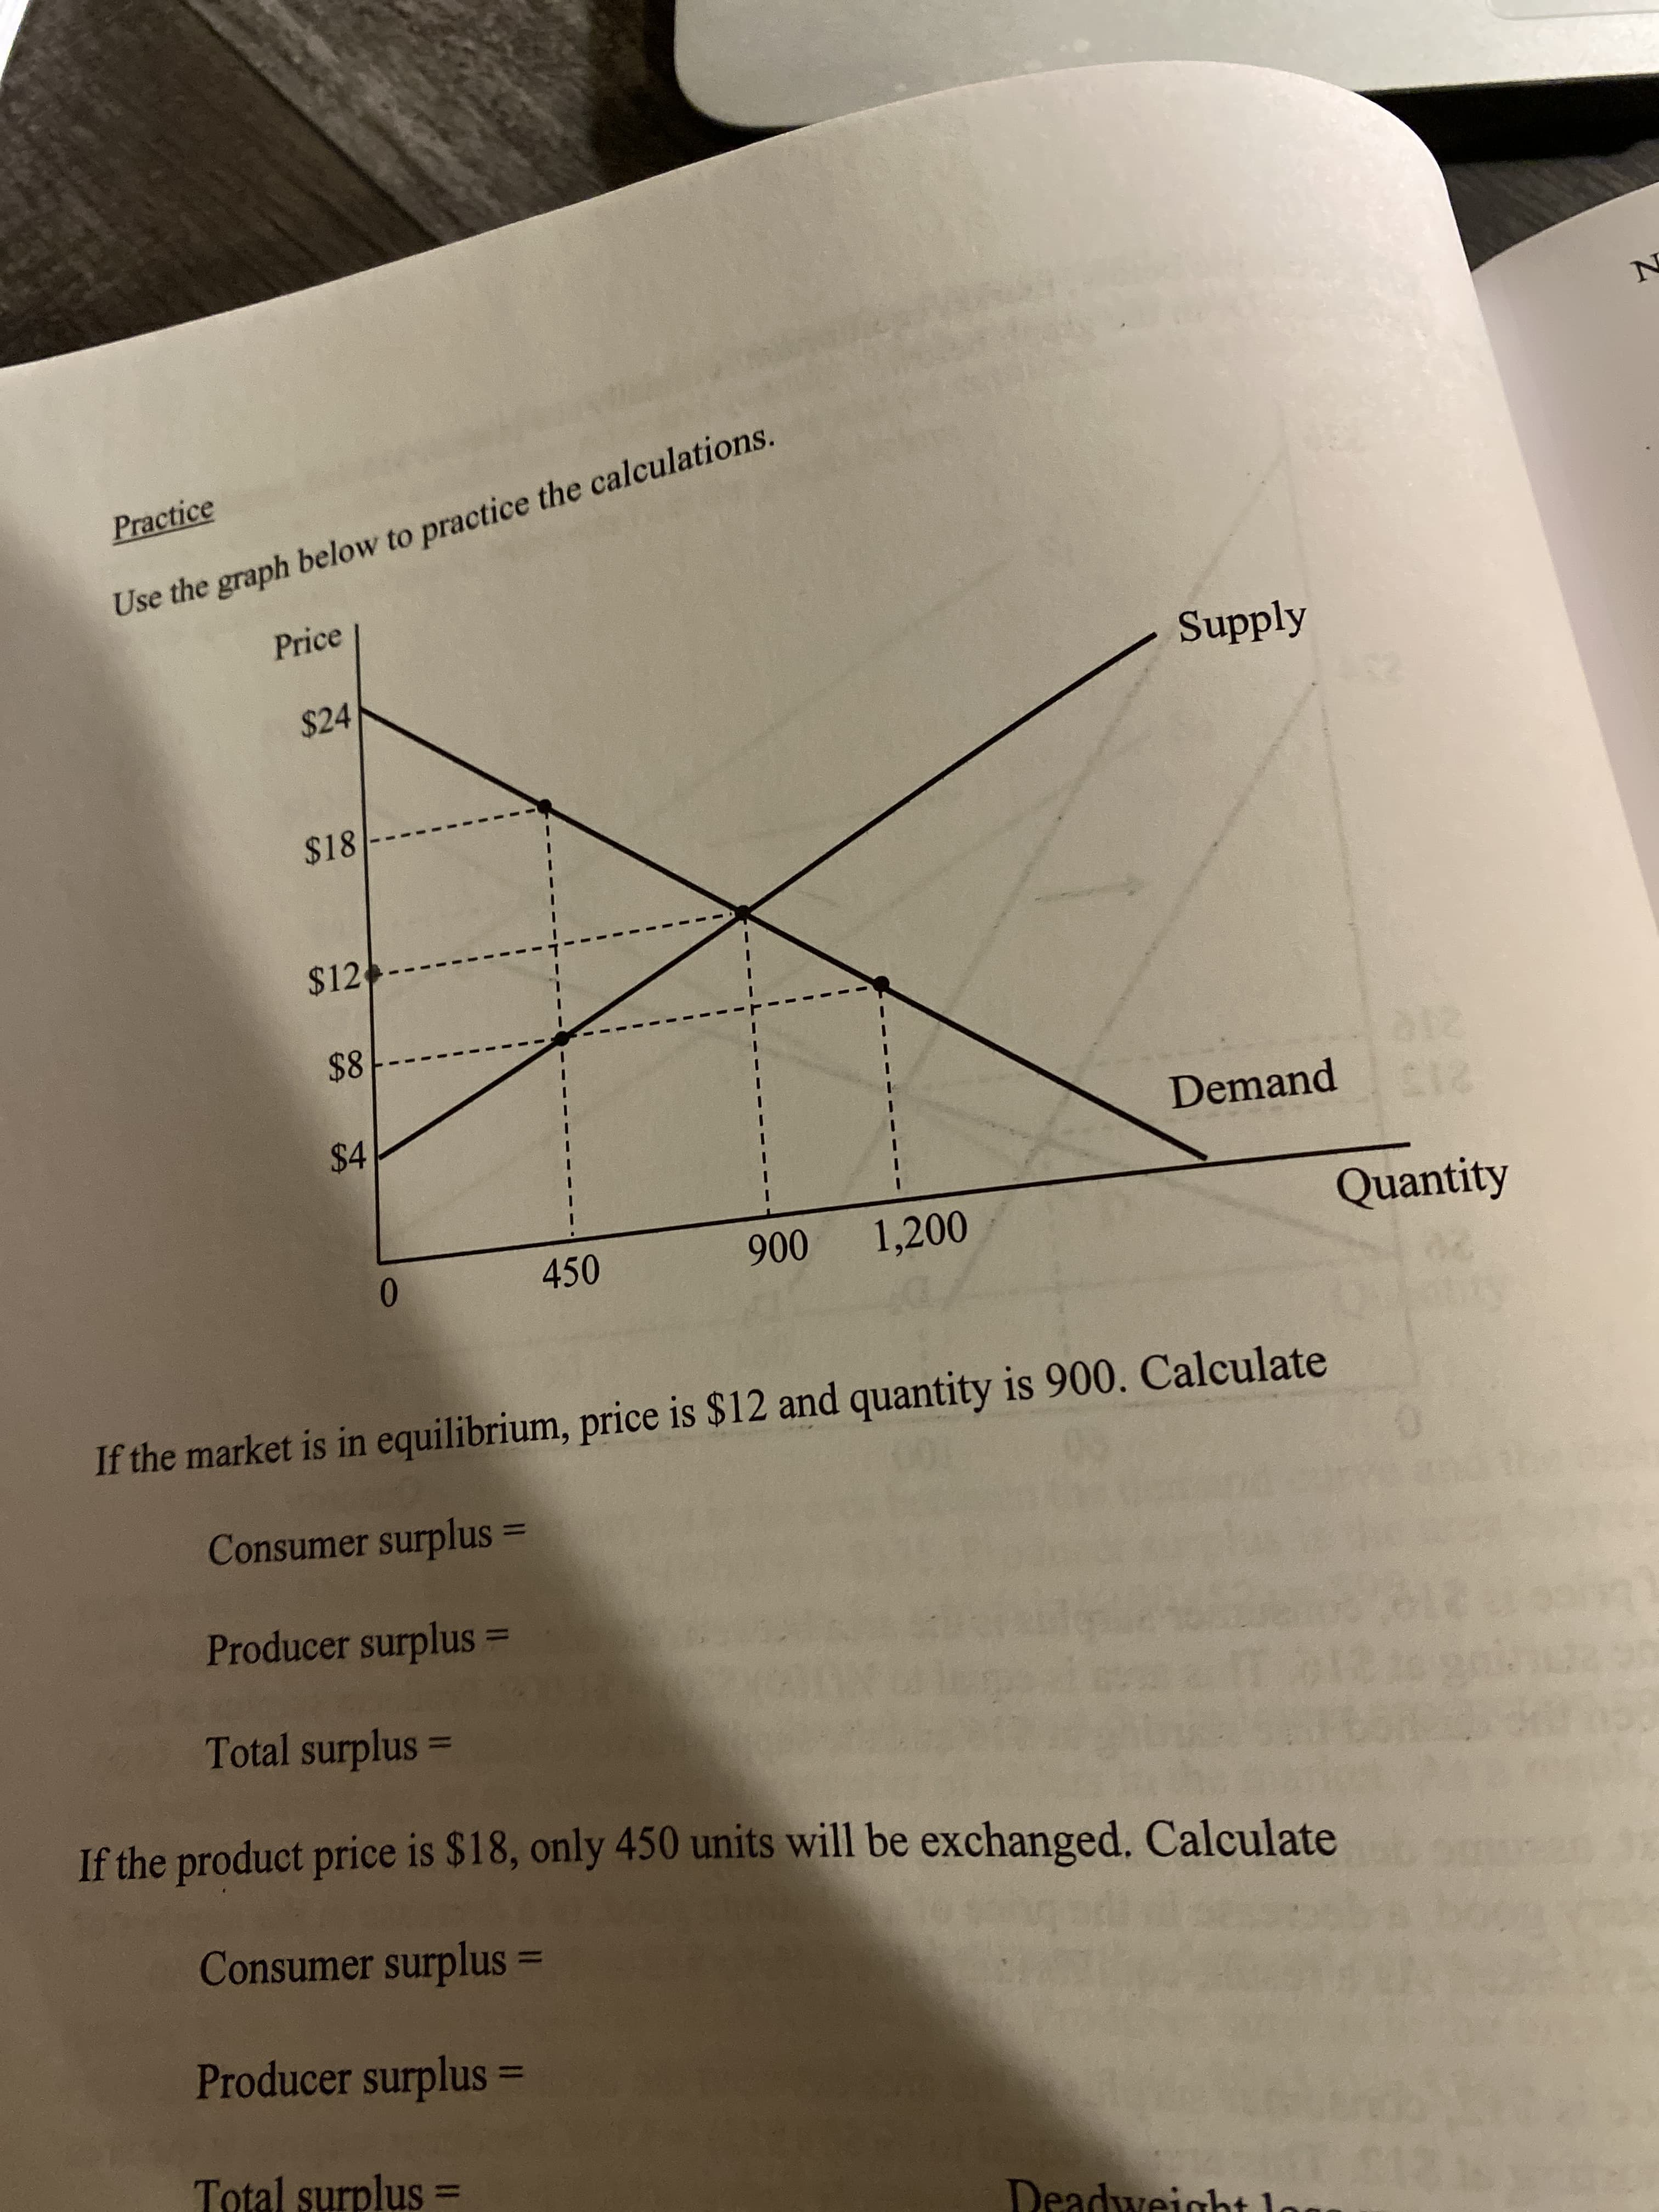 Practice
Use the graph below to practice the calculations.
Price
$24
Supply
$18
$12
$8
a12
$4
Demand
0.
450
900
1,200
Quantity
If the market is in equilibrium, price is $12 and quantity is 900. Calculate
Consumer surplus =
%3D
Producer surplus =
Total surplus =
%3D
If the product price is $18, only 450 units will be exchanged. Calculate
Consumer surplus =
Producer surplus =
Total surplus =
%3D
Deadweight 1
C12
